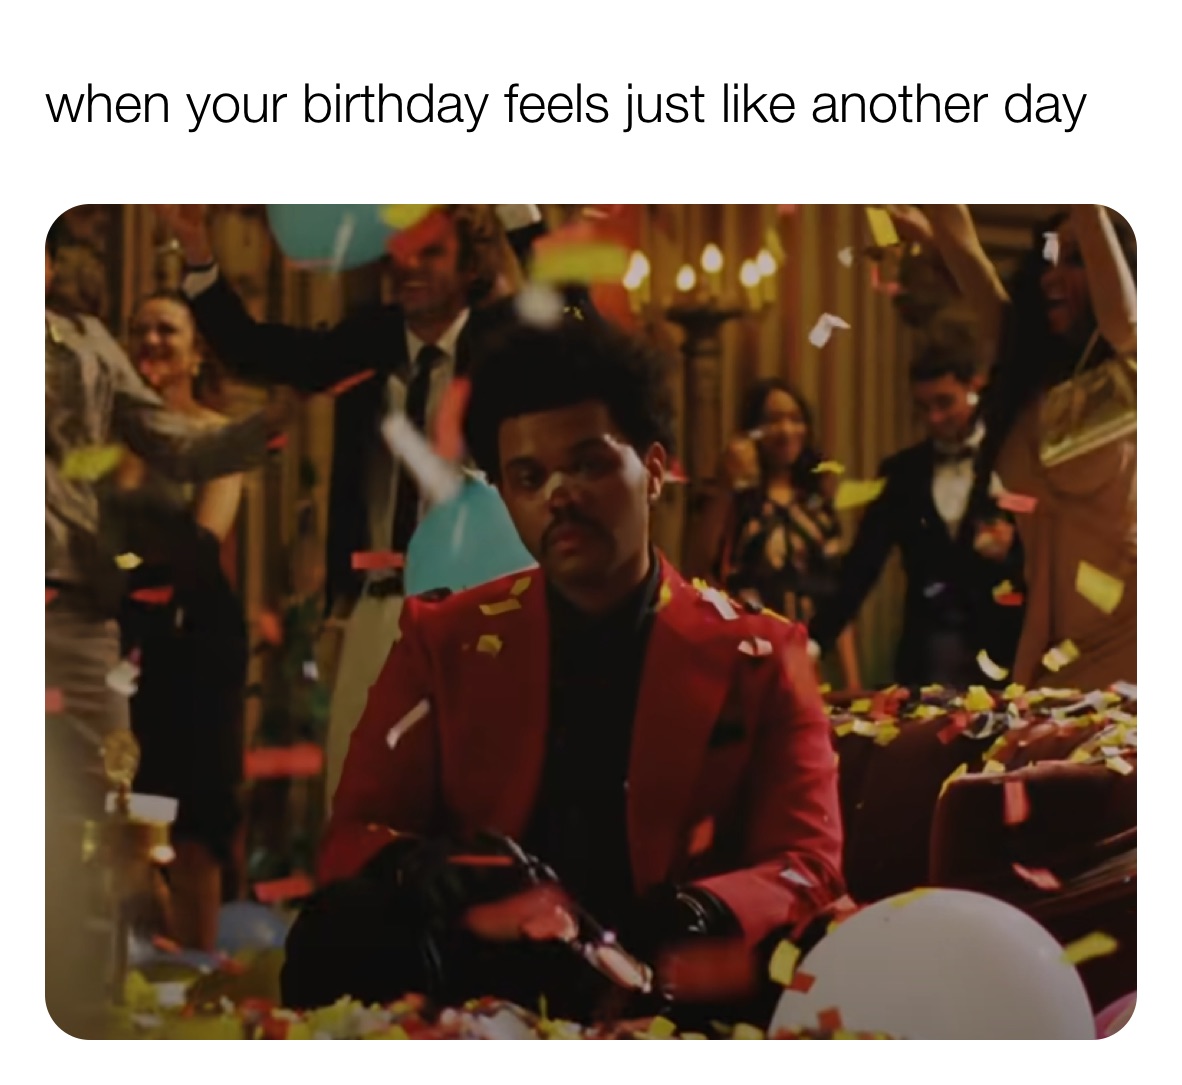 when your birthday feels just like another day